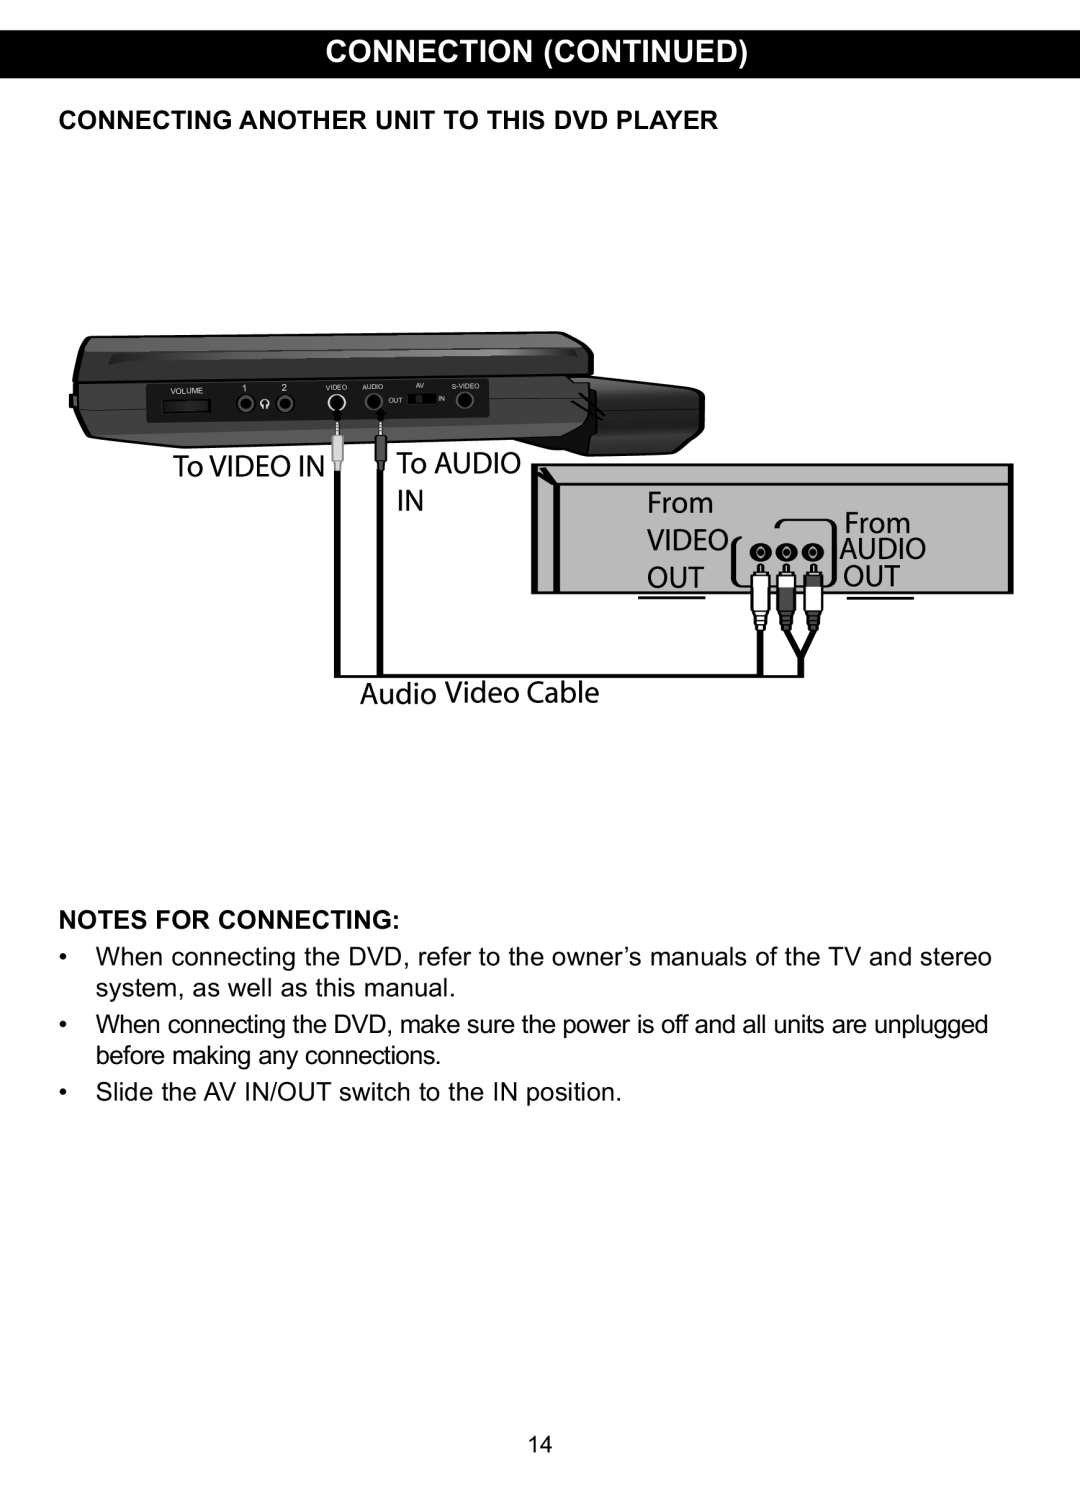 Memorex MVDP1088 manual Connection Continued, Connecting Another Unit To This Dvd Player, Notes For Connecting 